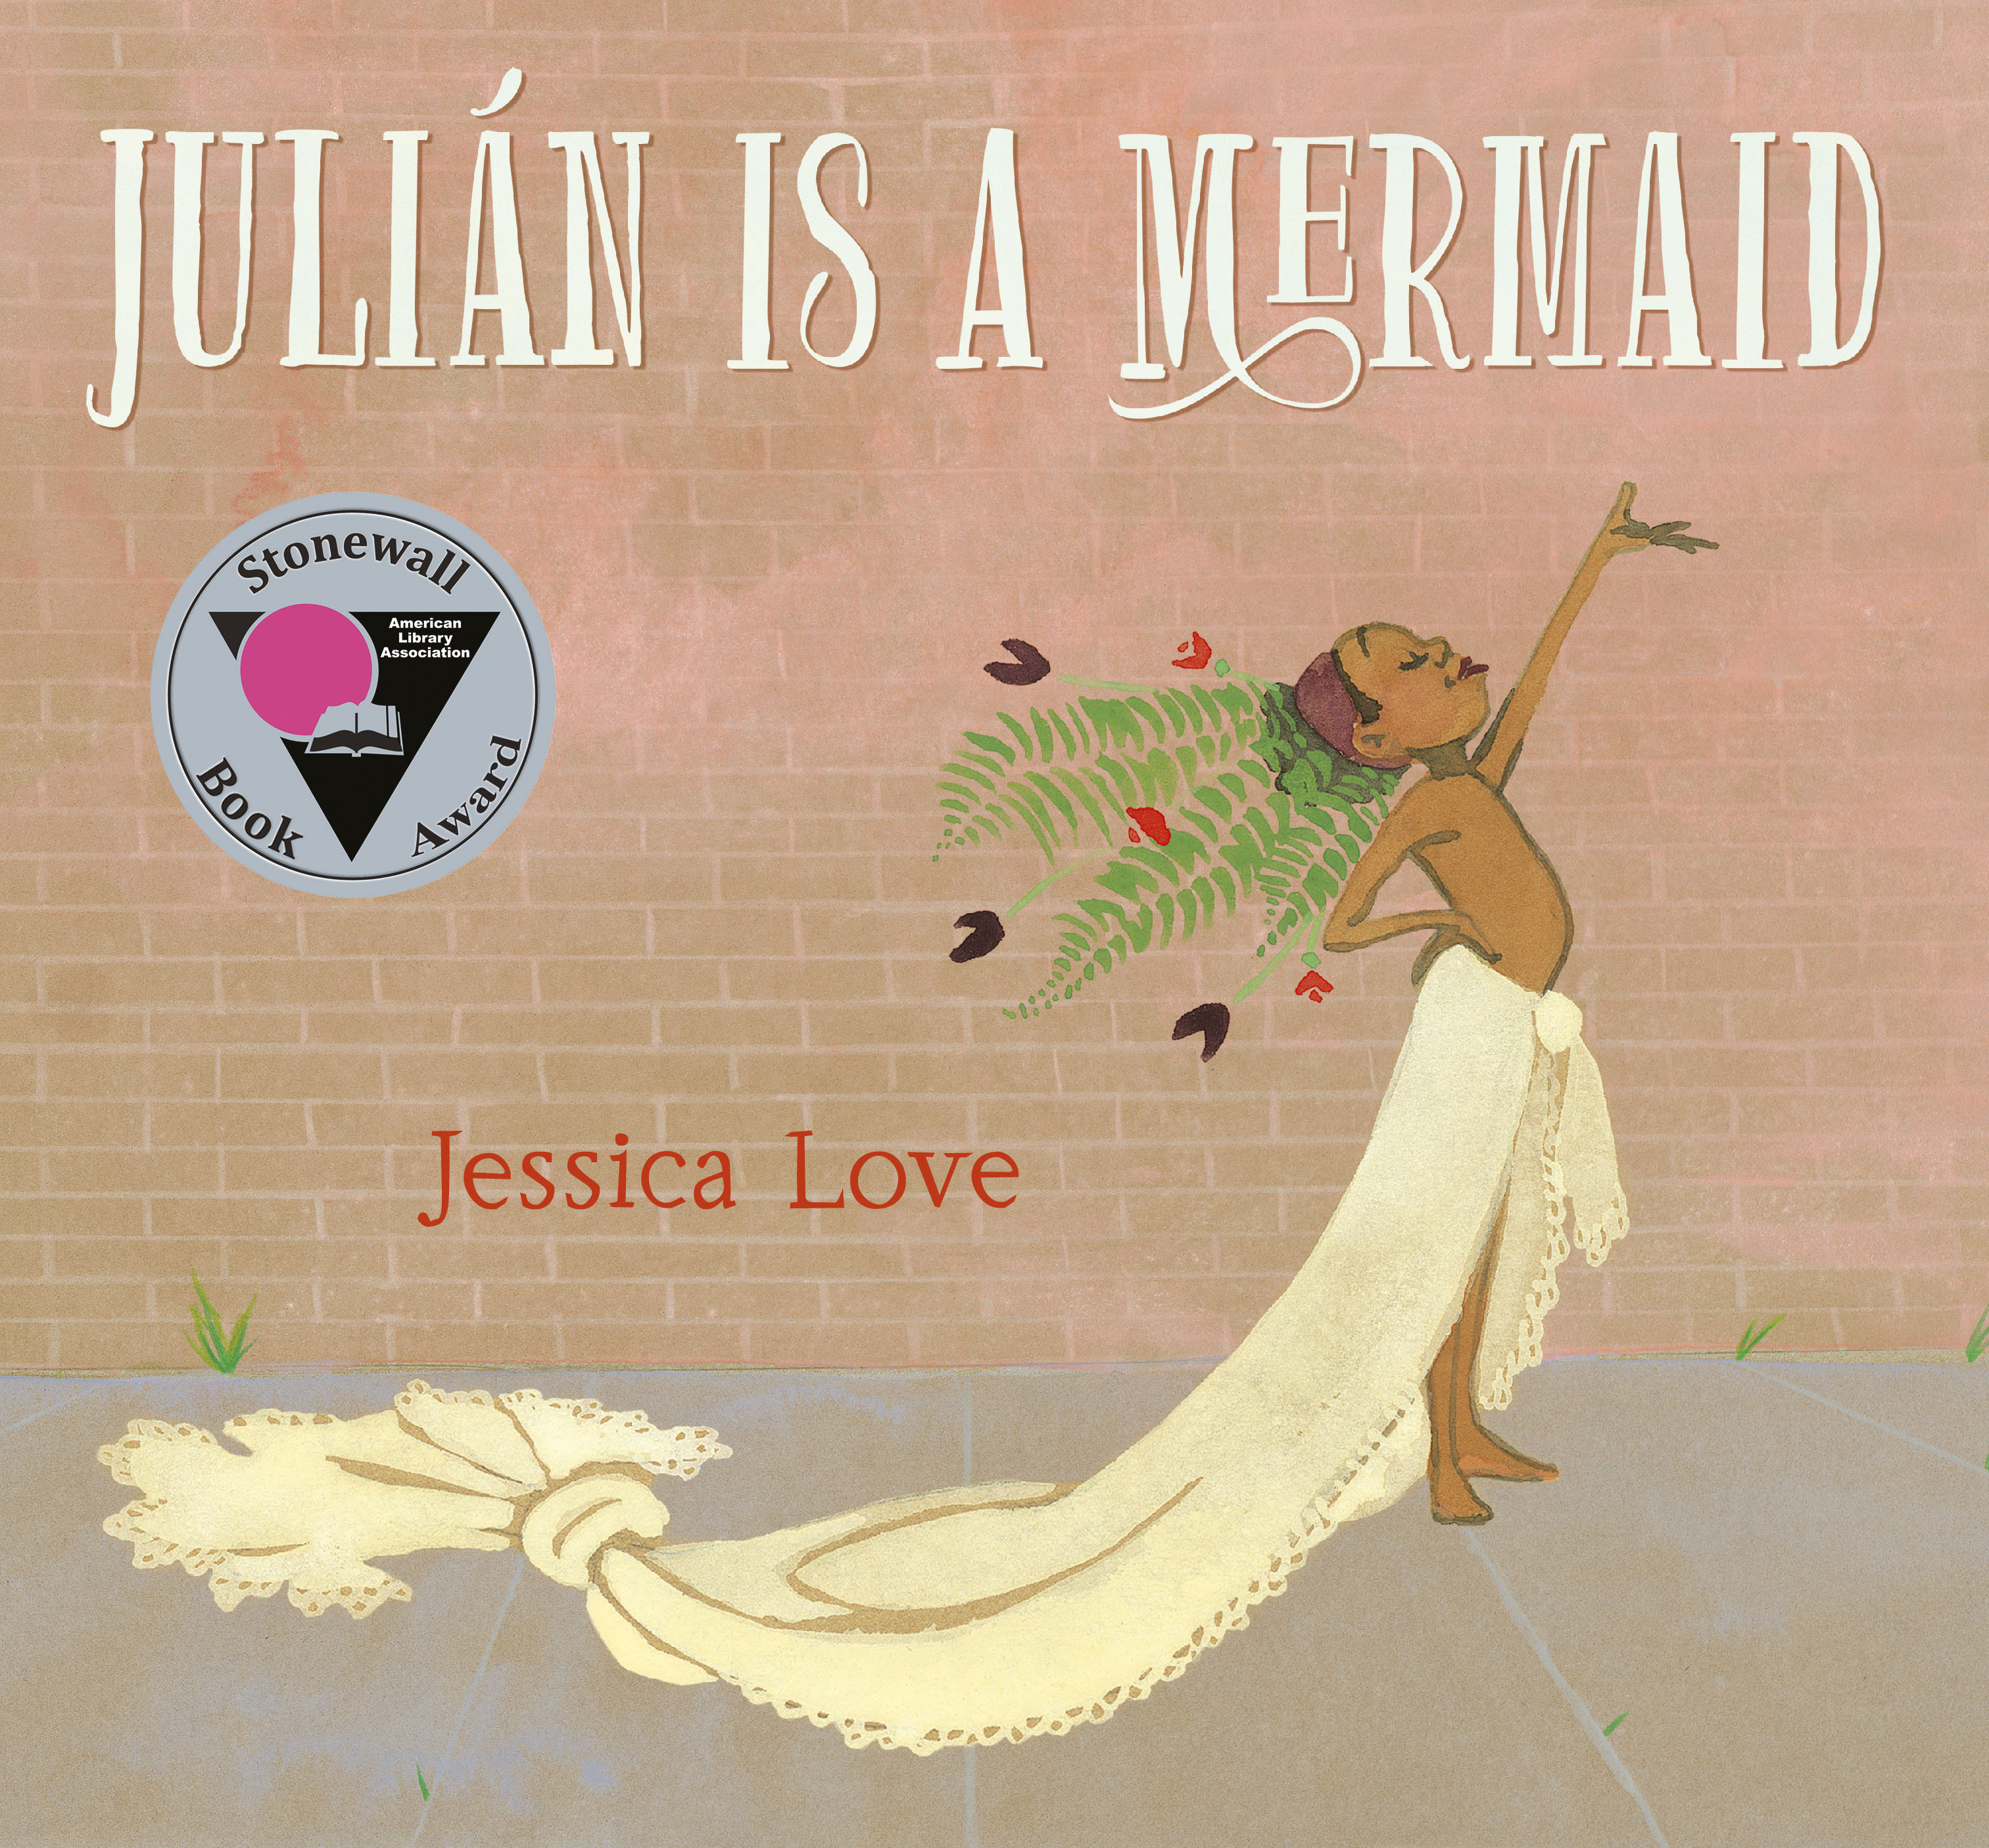 An image of the front cover of Julián is a Mermaid featuring a child in a mermaid costume with their arm held high and the Stonewall Book Award.